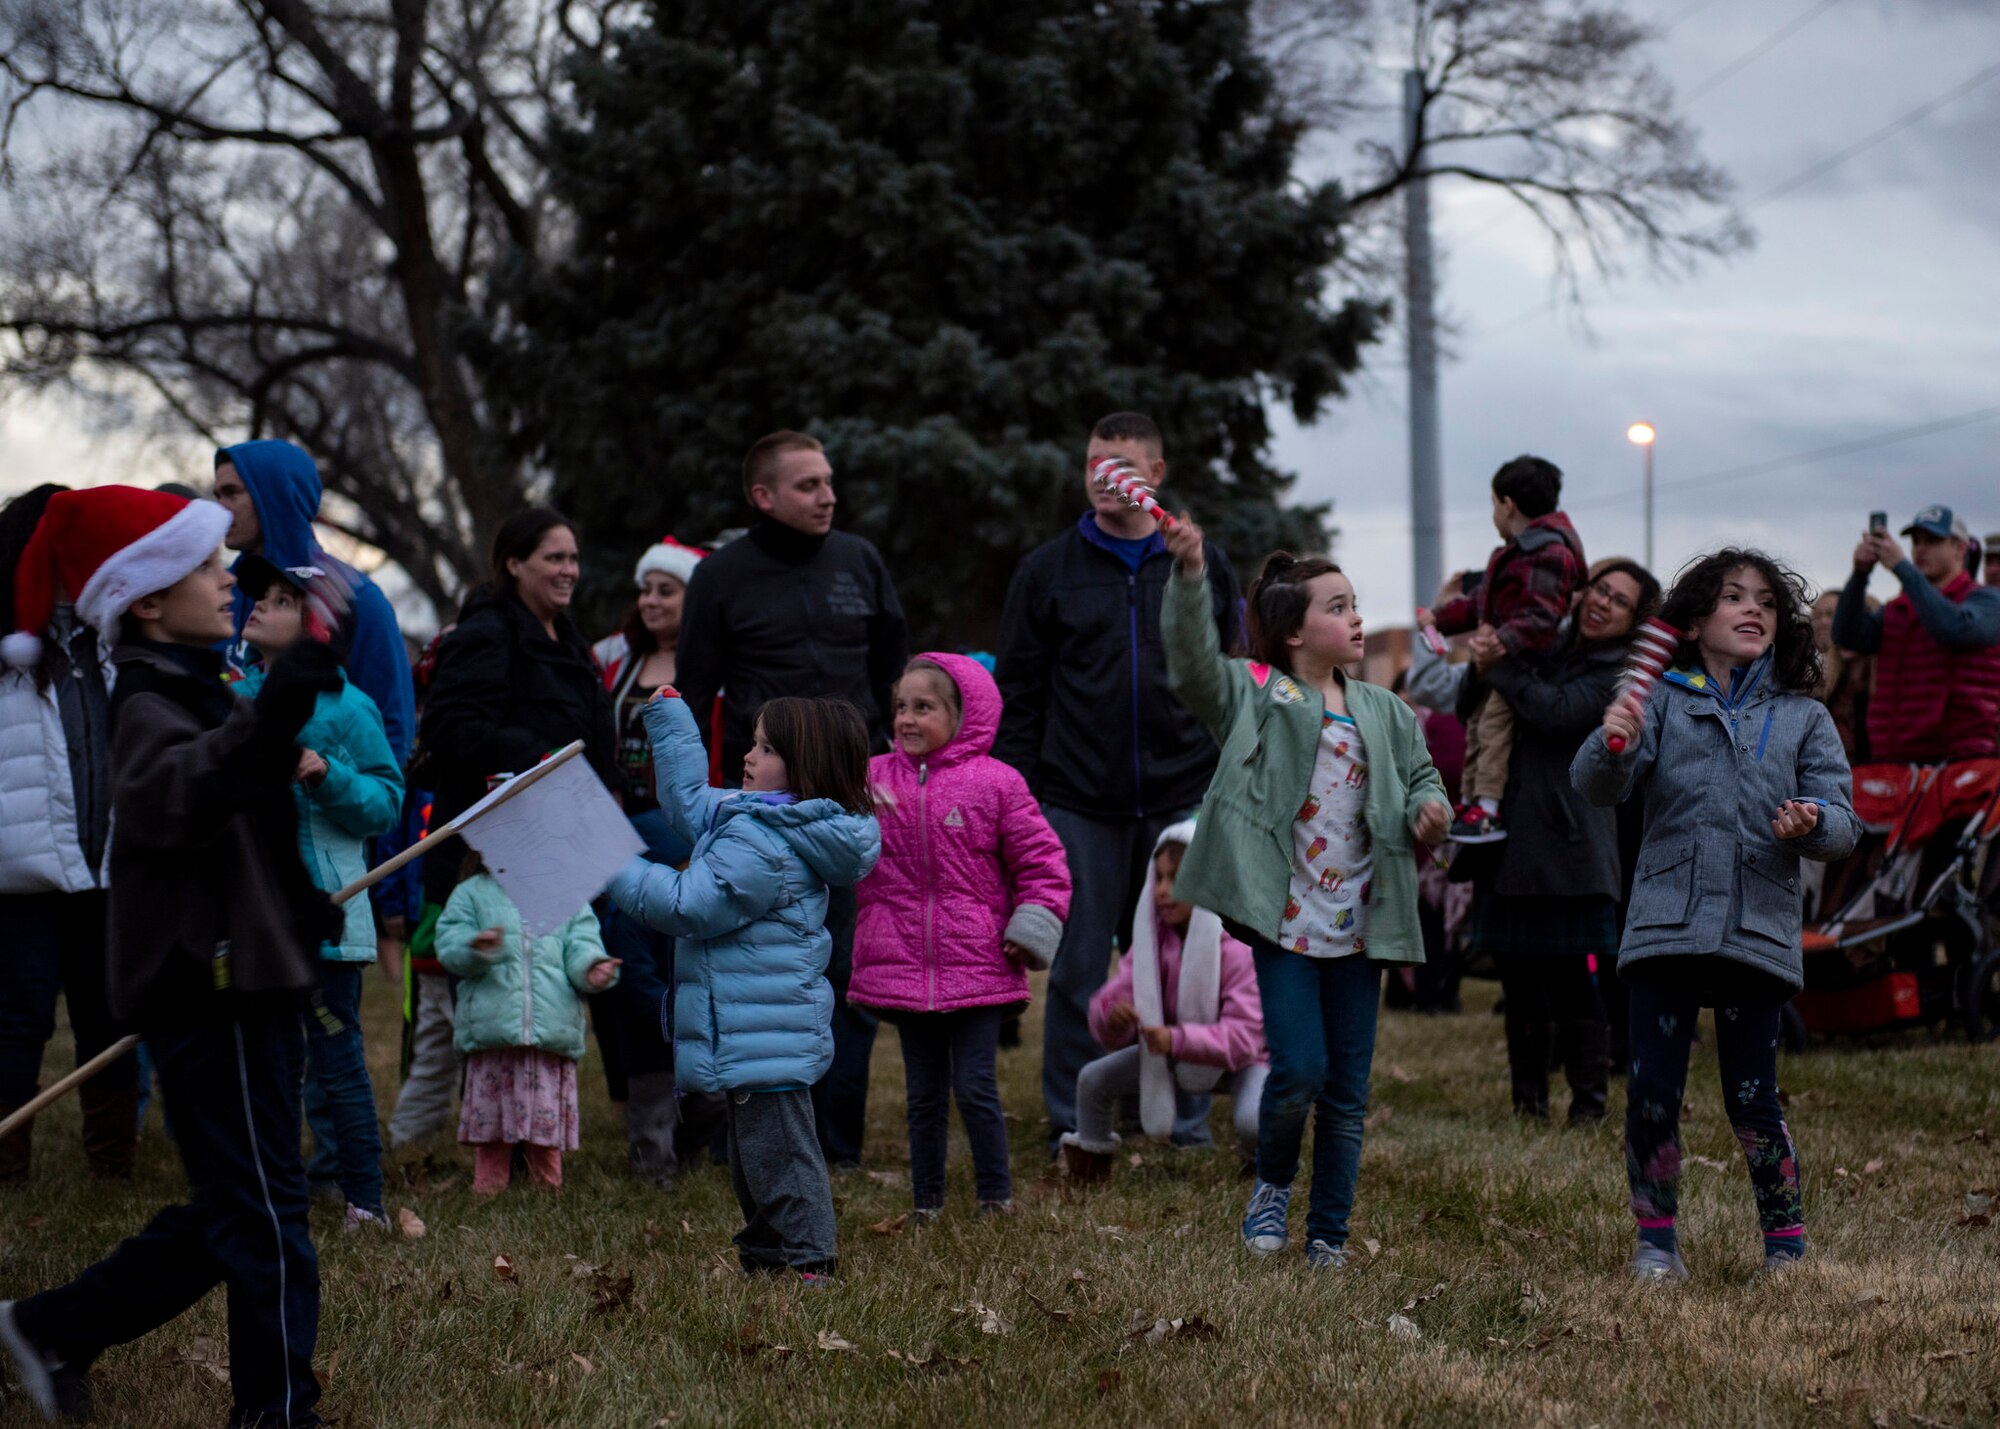 Families wait for the Christmas tree to be lit at Kirtland Air Force Base, N.M., Dec 6, 2018. In order for the Christmas tree to be lit, those with jingle bells were required to ring the bells as loud as they could. (U.S. Air Force photo by Airman 1st Class Austin J. Prisbrey)